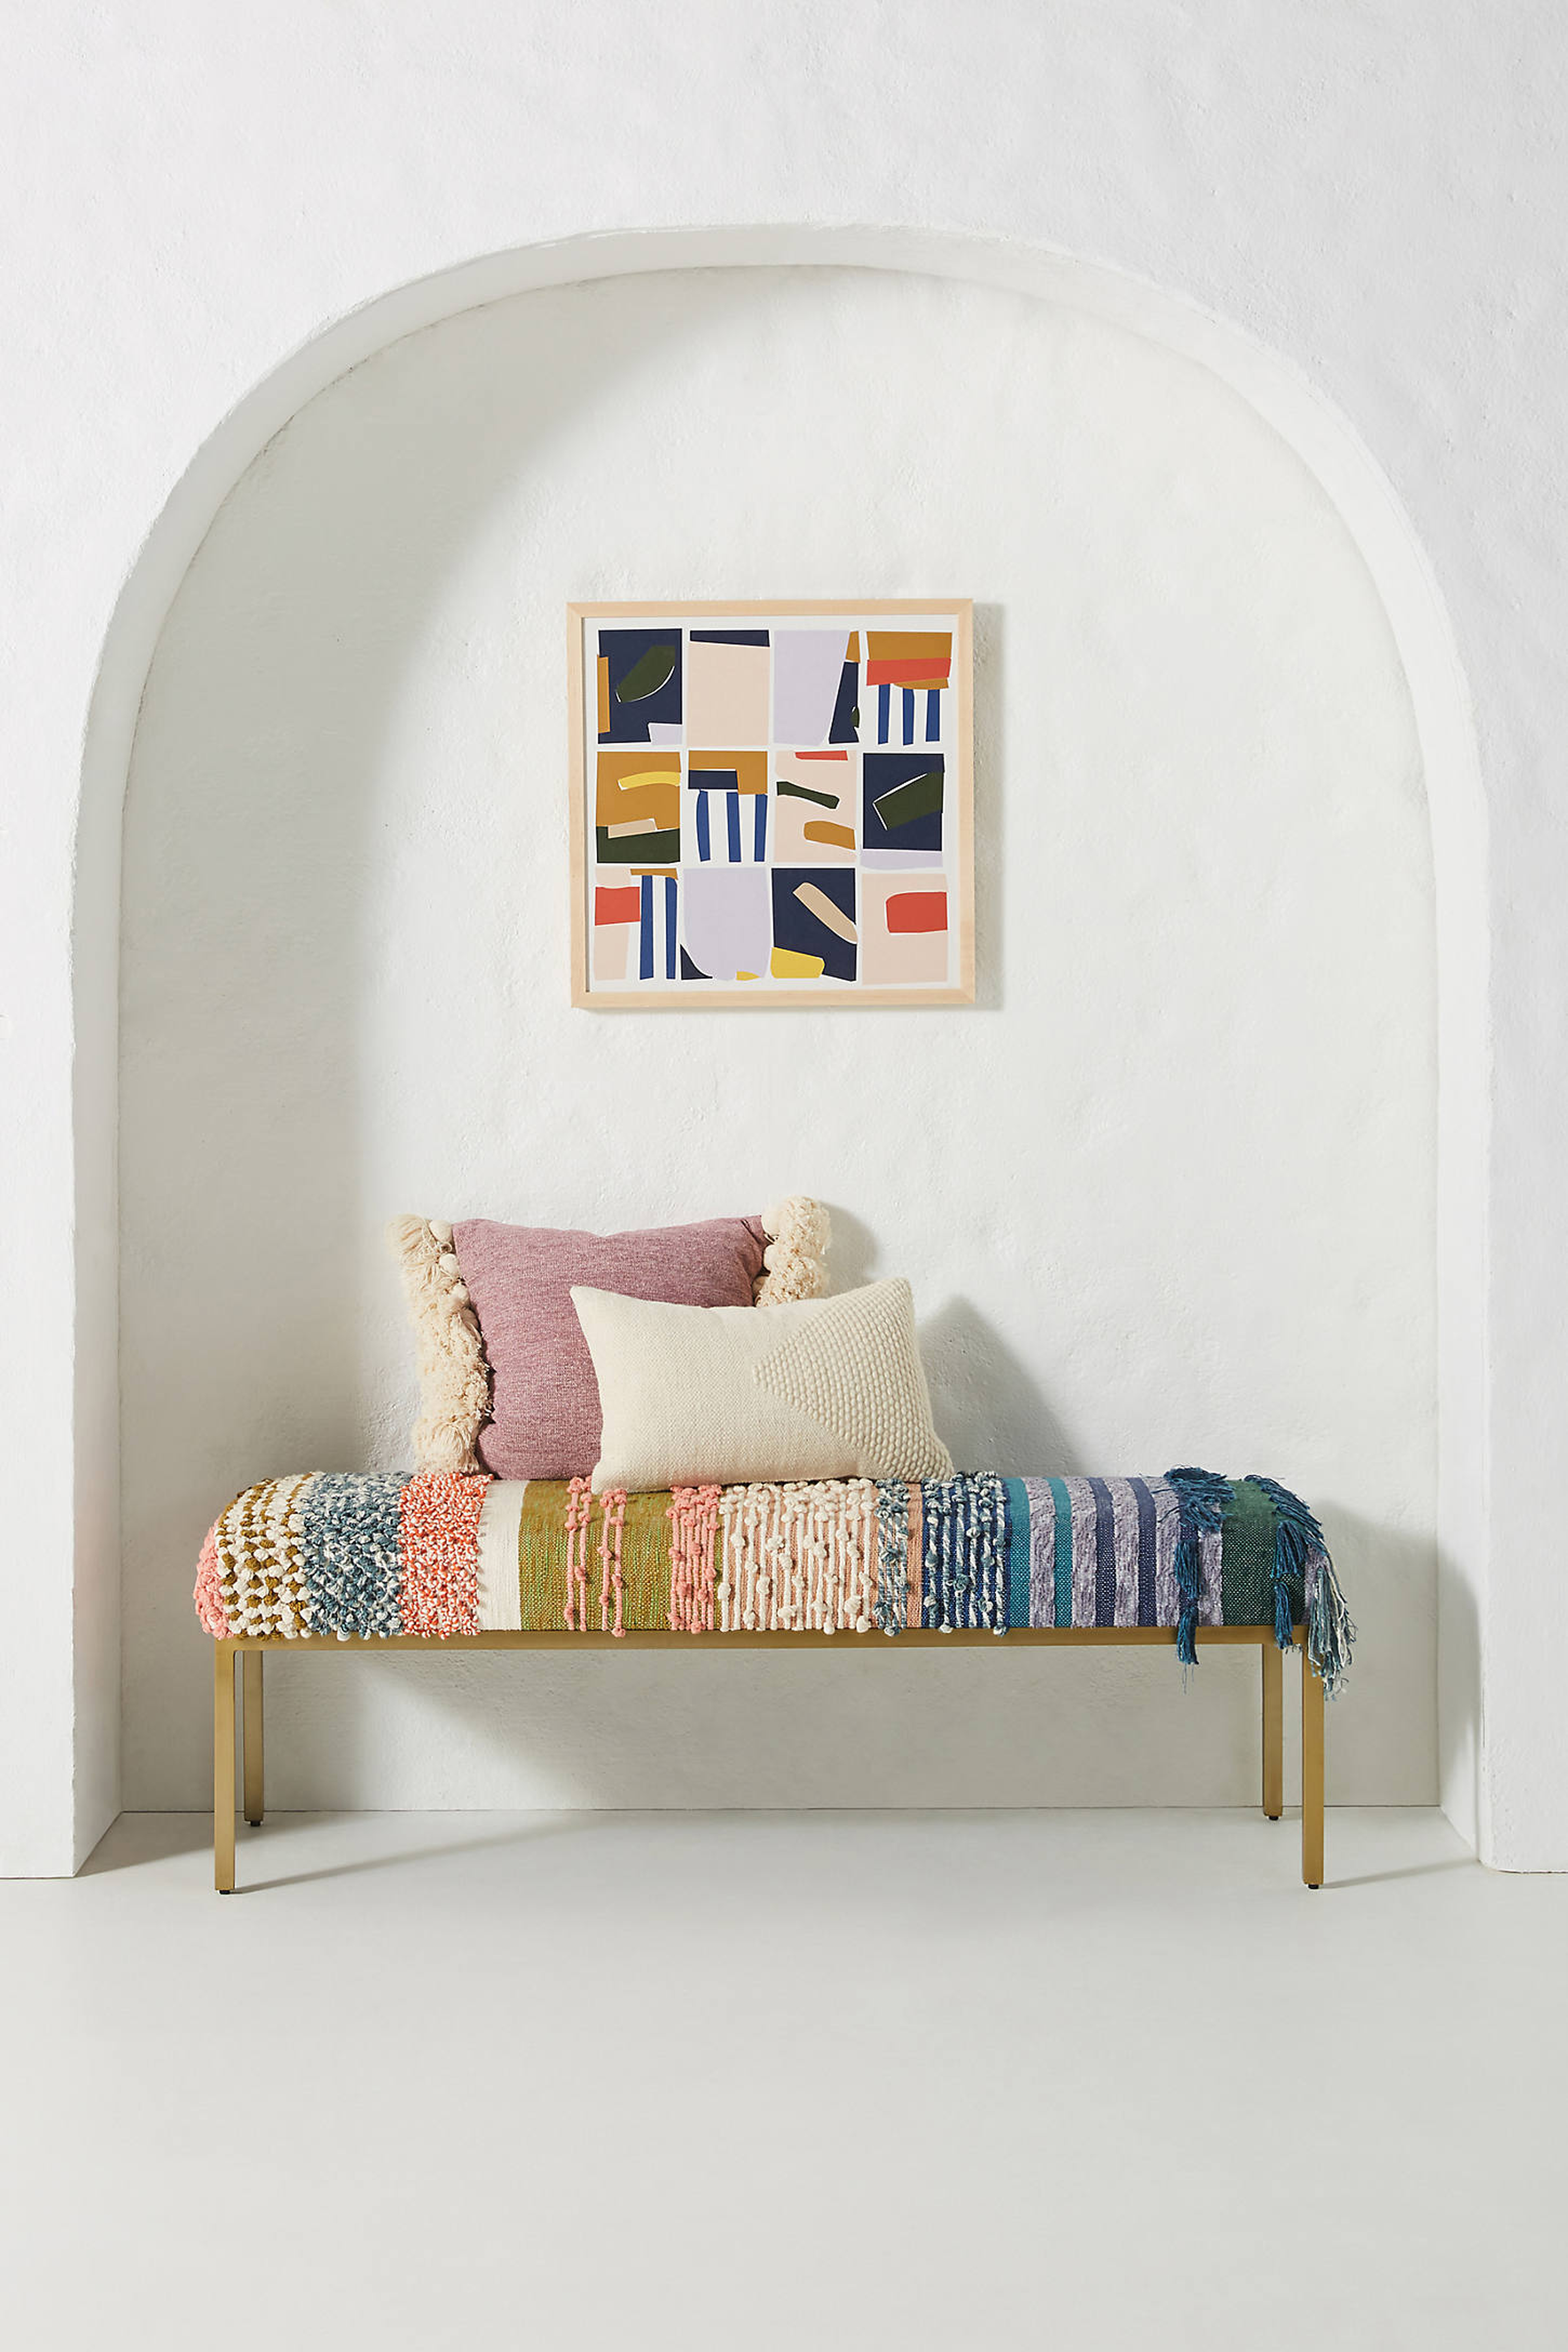 All Roads Zahara Ottoman By All Roads Design in Assorted - Anthropologie